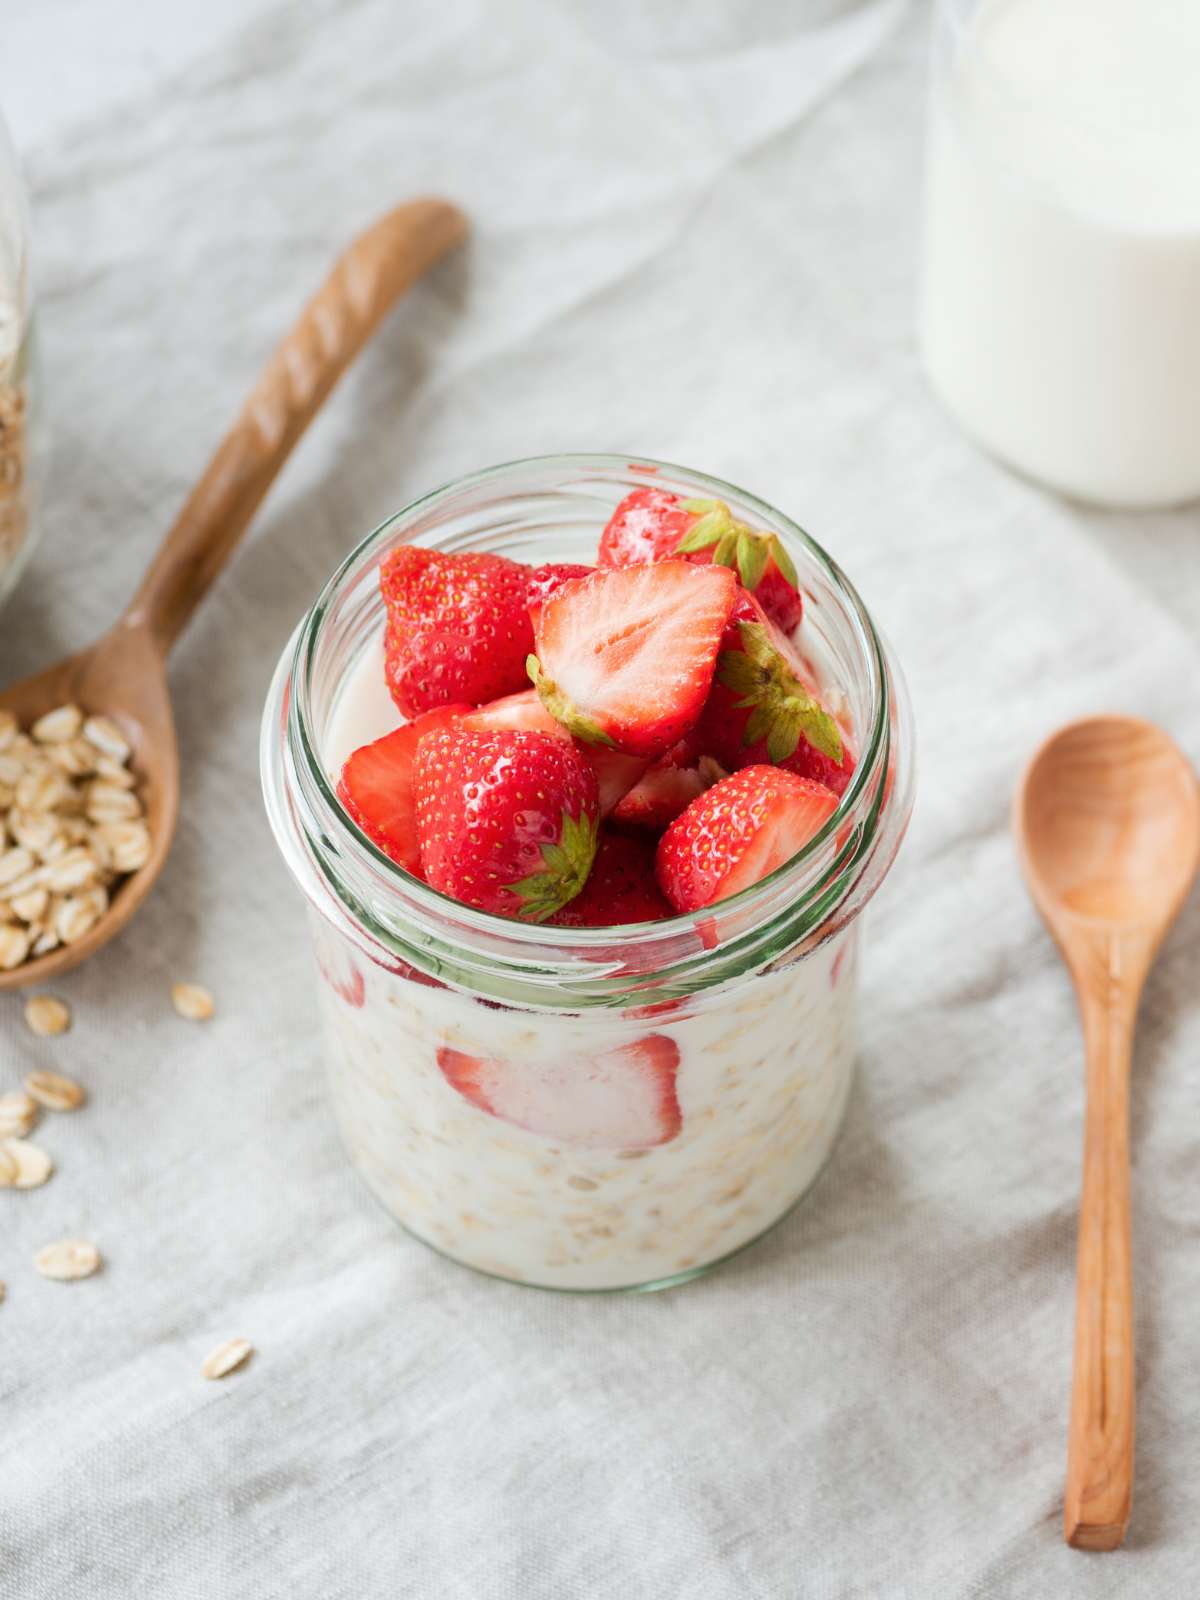 Mason jar full of protein overnight oats and topped with fresh strawberries.